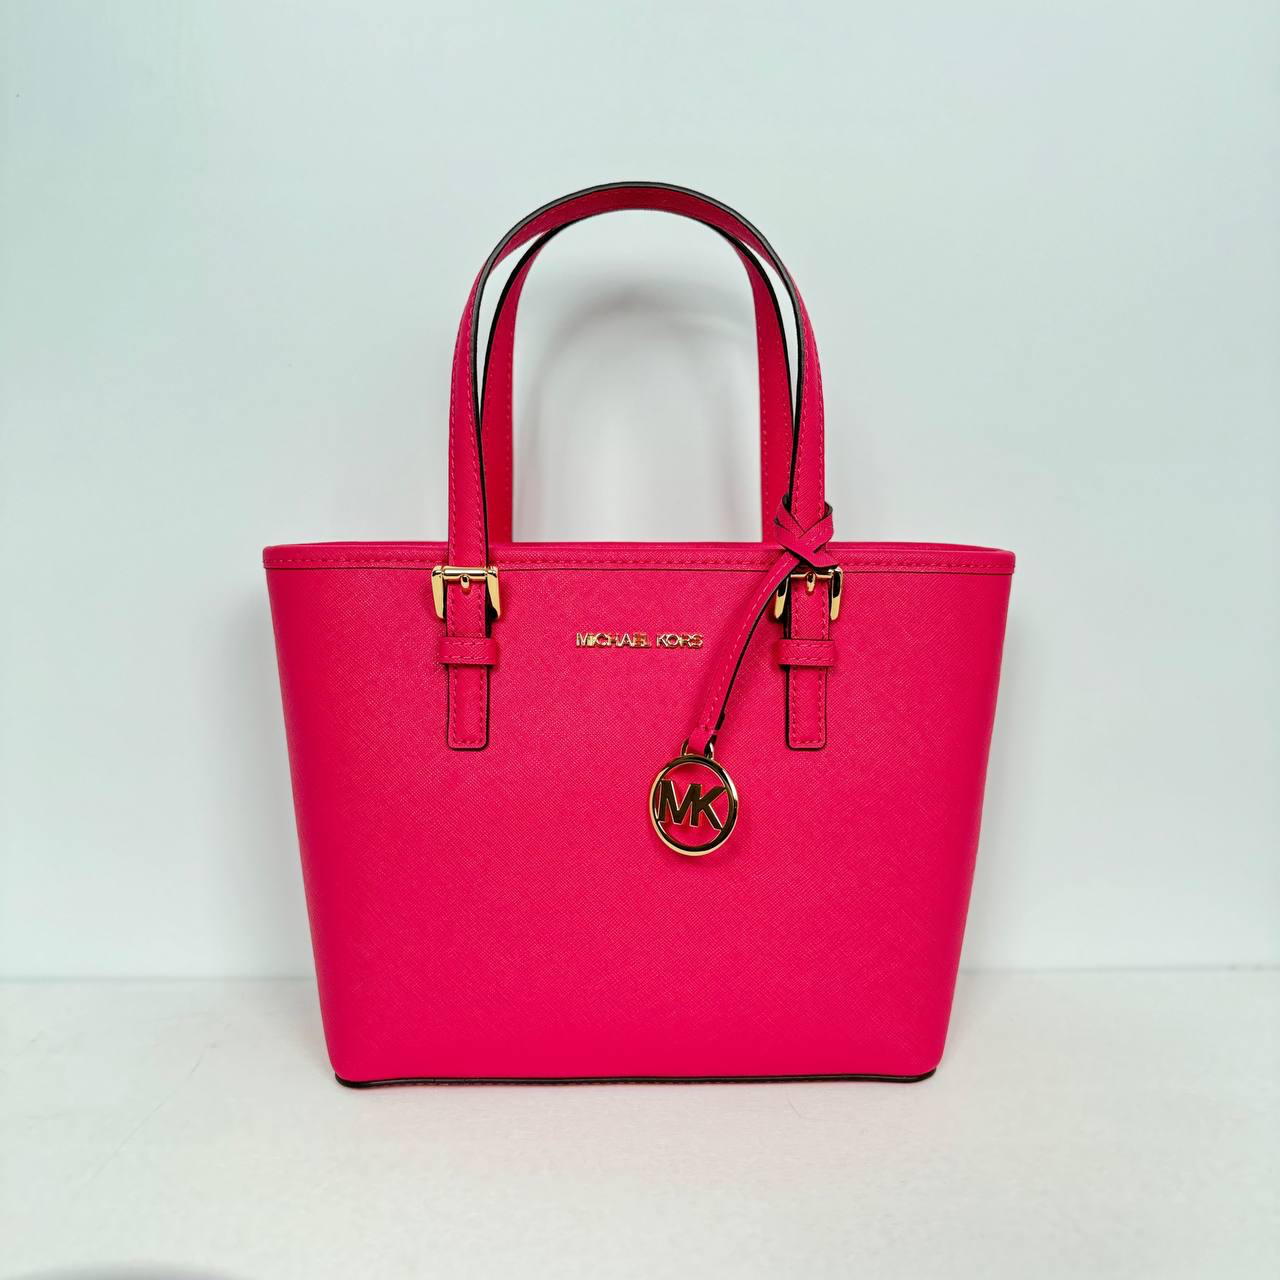 MK Jet Set Travel Extra-Small Carryall Convertible TZ Tote in Electric Pink (35T9GTVT0L)